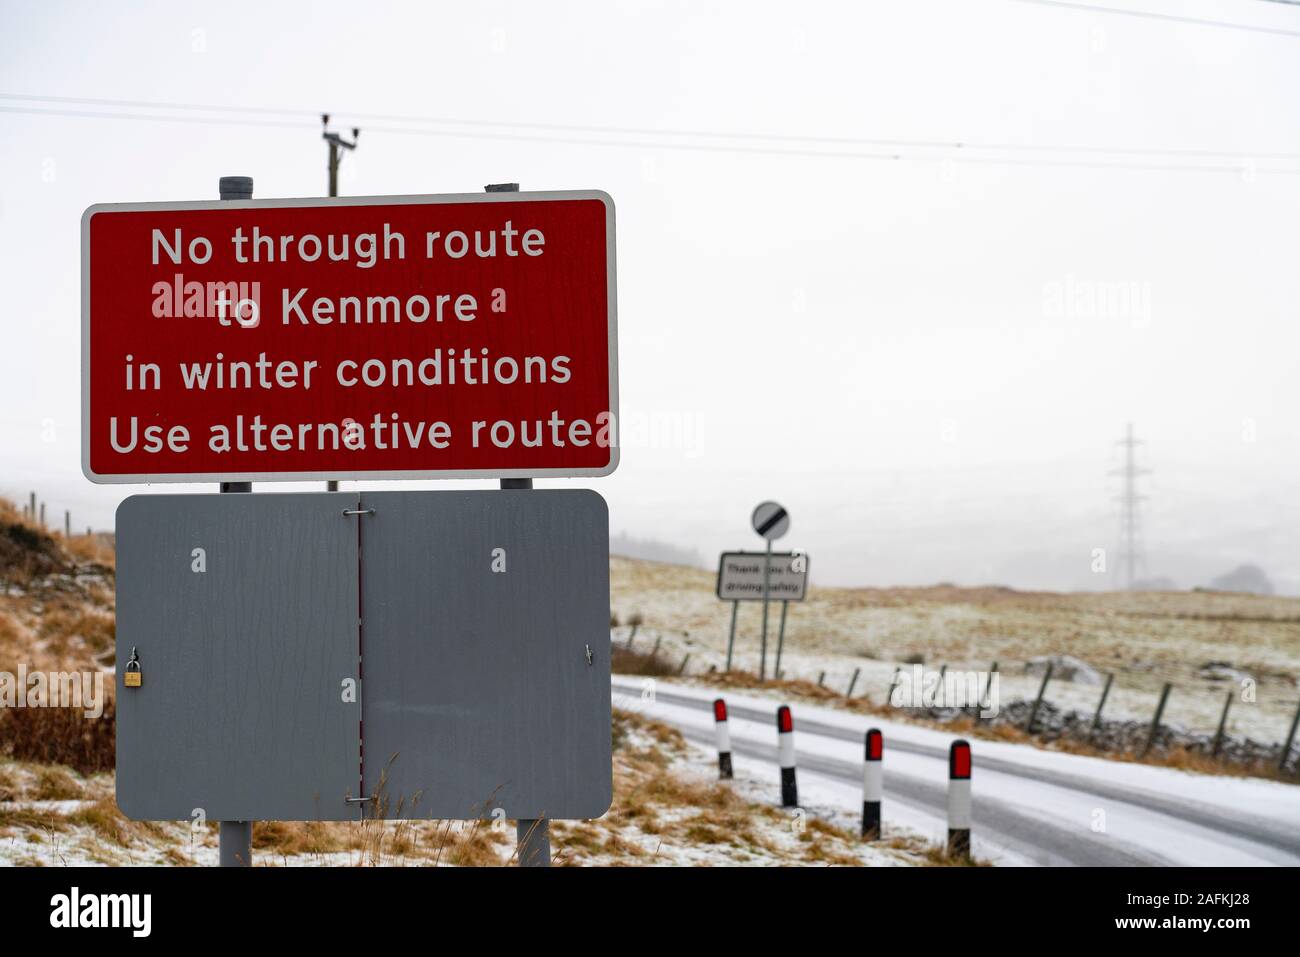 Amulree, Perthshire, Scotland, UK. 16th Dec 2019. Warning sign on single-track U173 Kenmore to Amulree road seen during a wintry snow fall today. Police and Perth and Kinross Council plan to close a five-mile long stretch of the scenic road through Glen Quaich for 17 weeks from 23 Dec 2019 because it is too dangerous in snow and ice. The road through Glen Quaich is regarded as one of the most picturesque, and dangerous, in Perthshire. Stock Photo